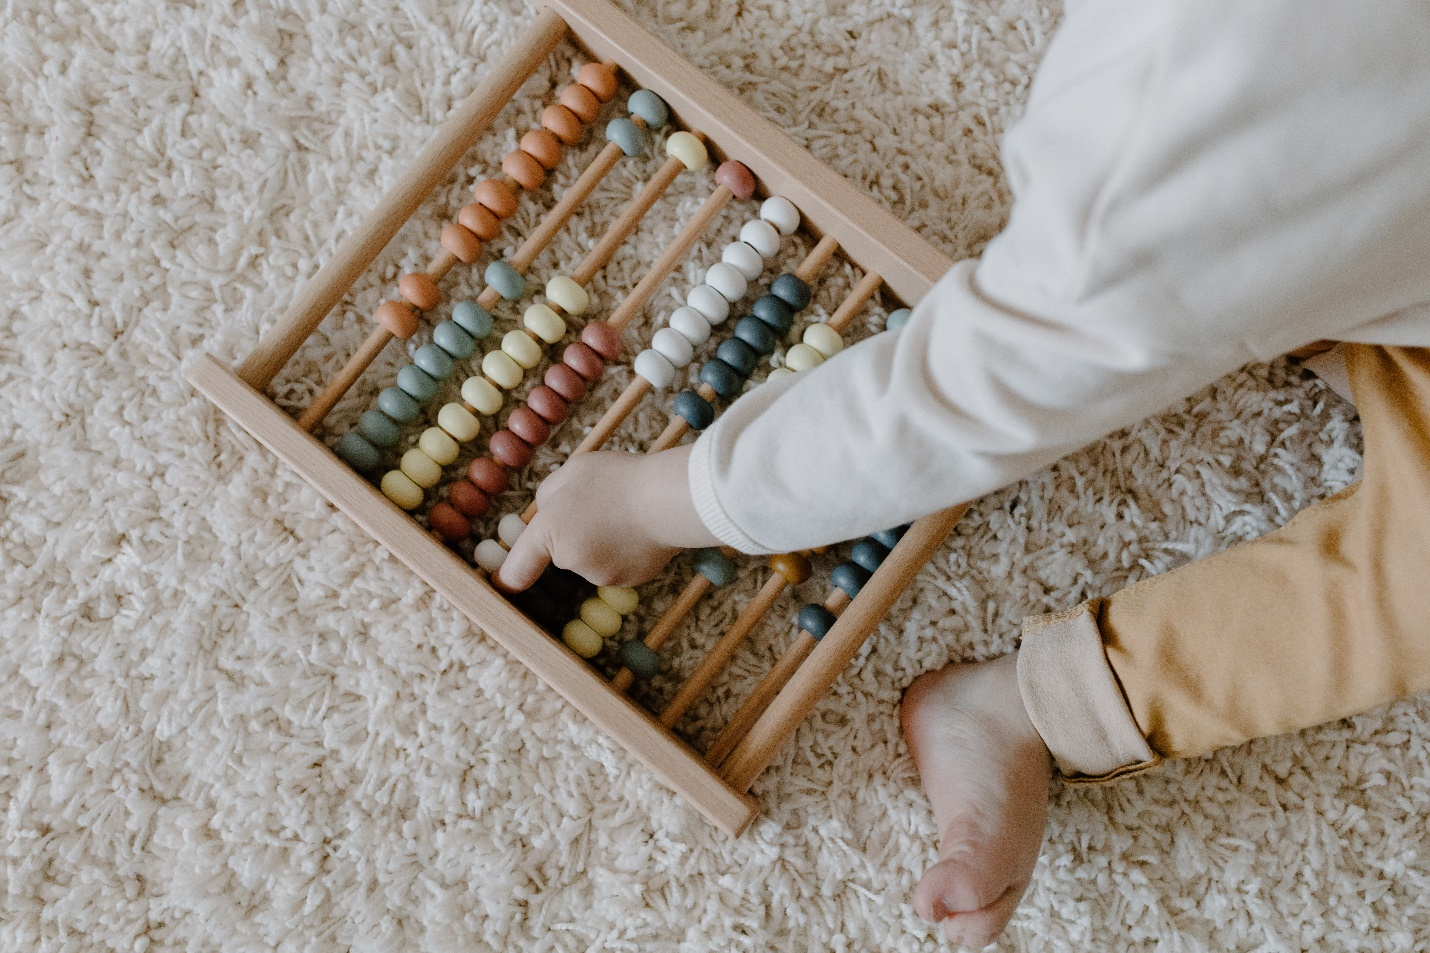 A toddler's hand and foot are seen with a wooden abacus on a plush carpet.